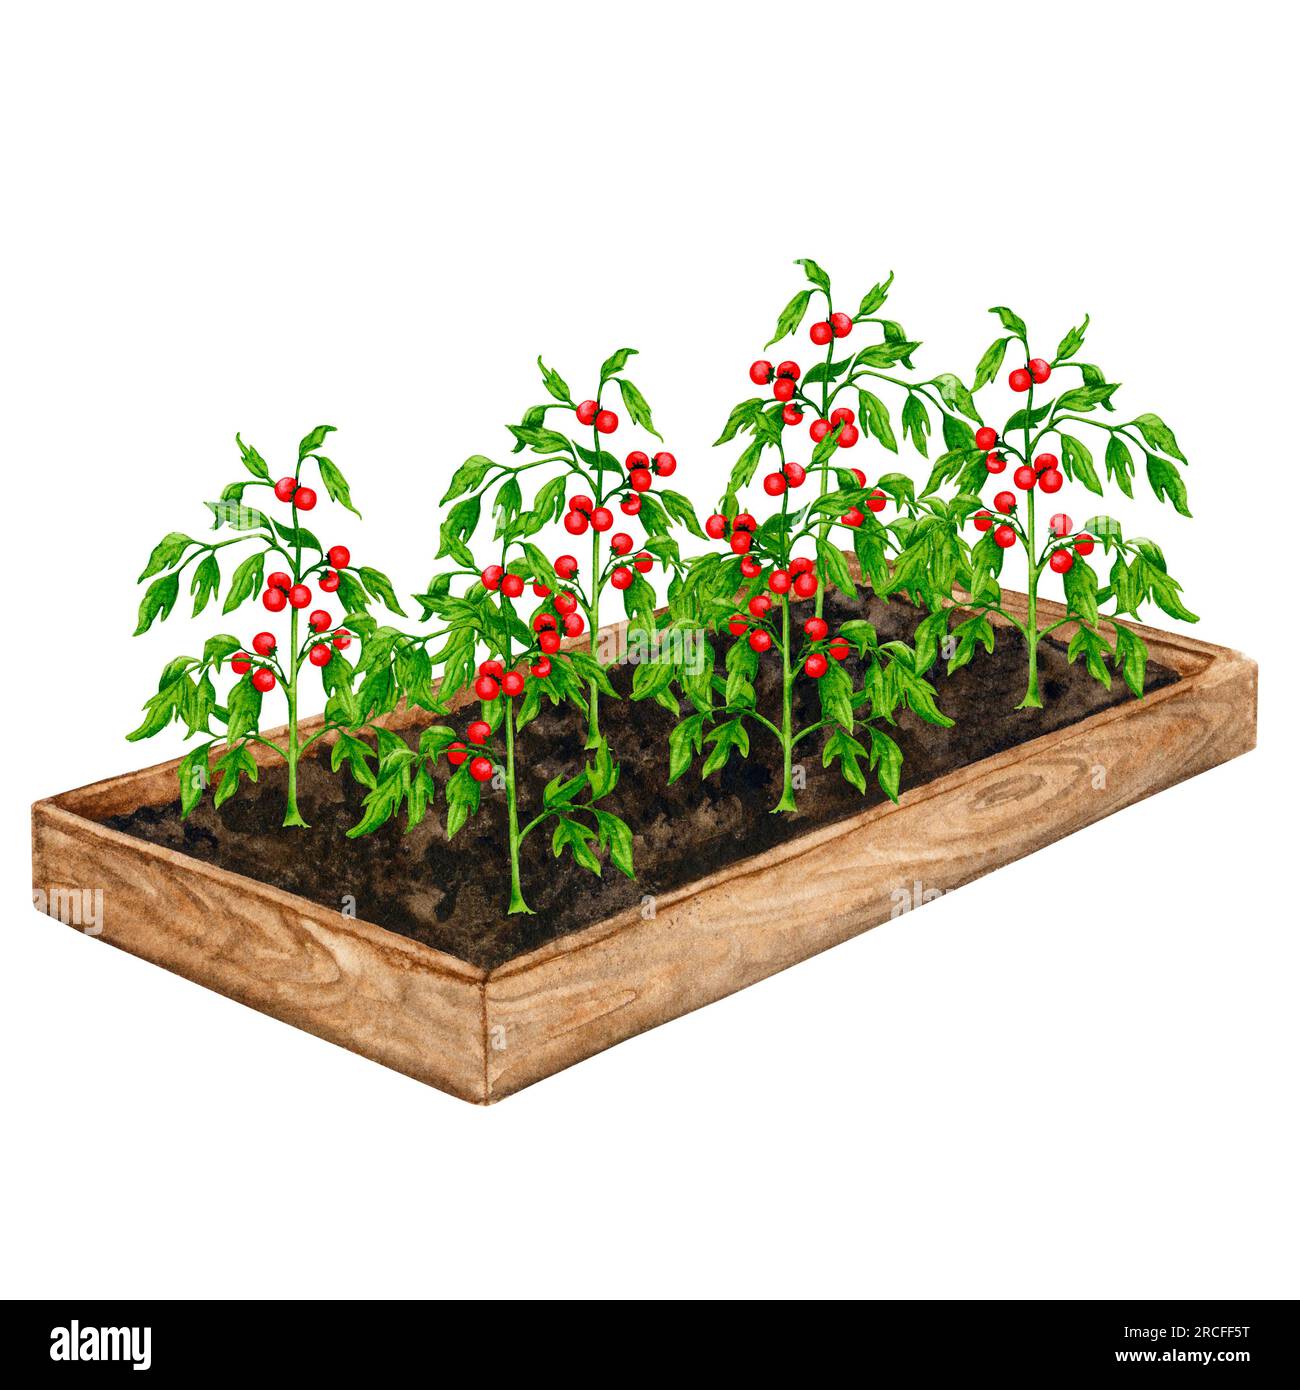 Wooden garden bed with tomato plants with fruits. Watercolor element on the theme of gardening, spring seedlings, growing vegetables. Stock Photo